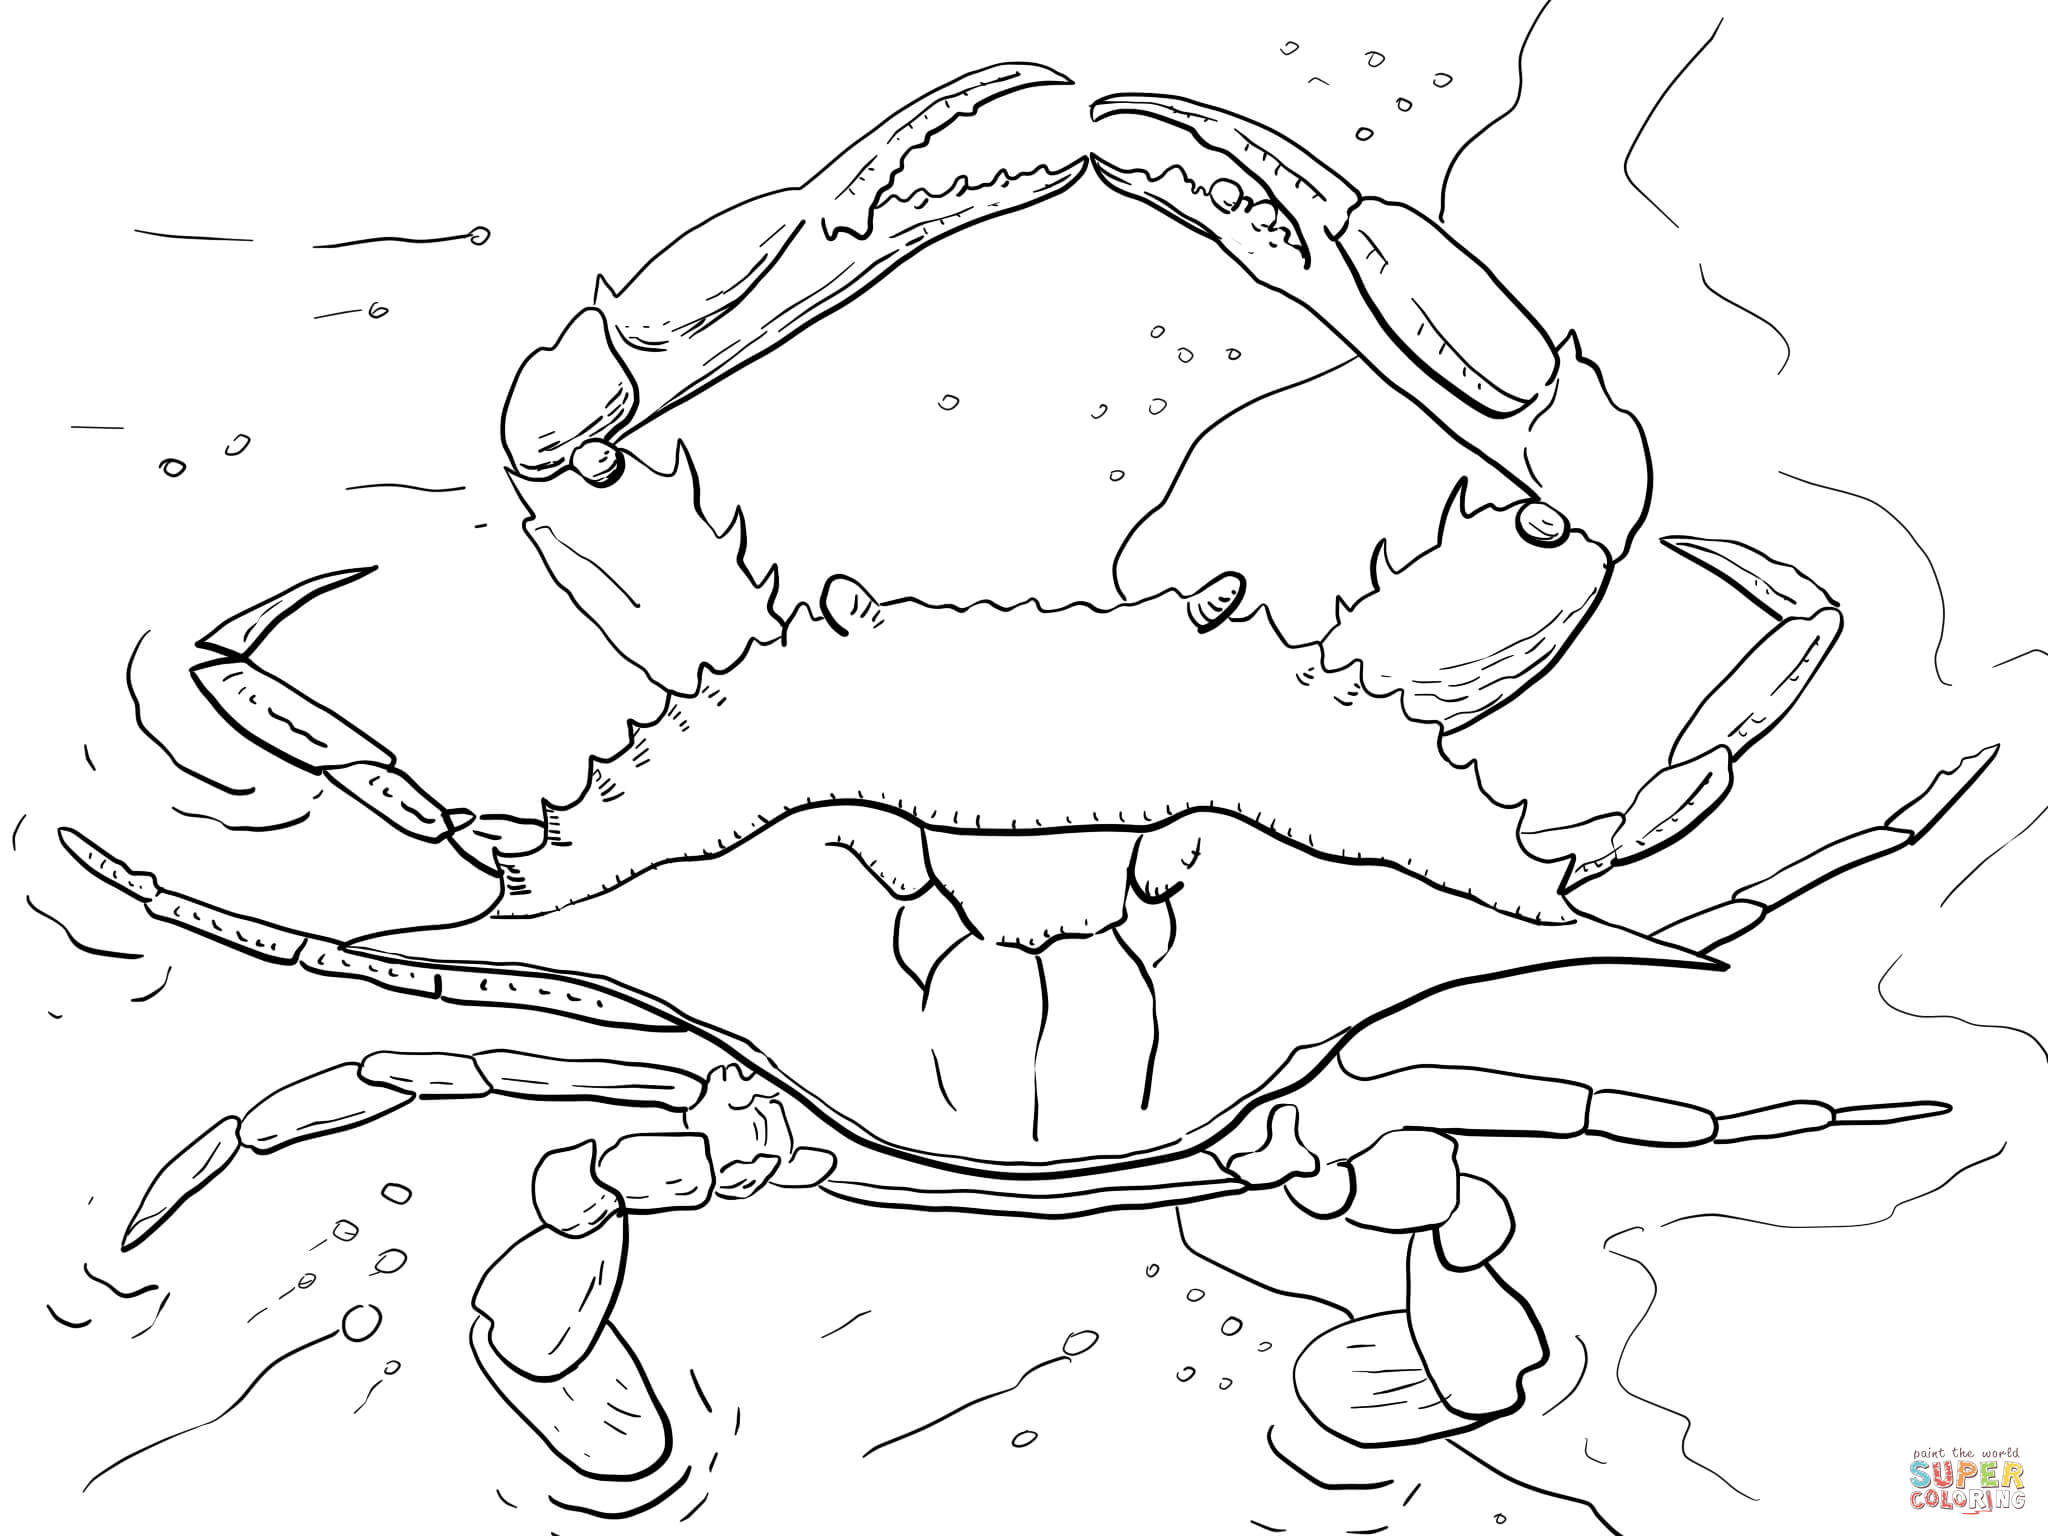 Atlantic Ocean Blue Crab coloring page | Free Printable Coloring Pages